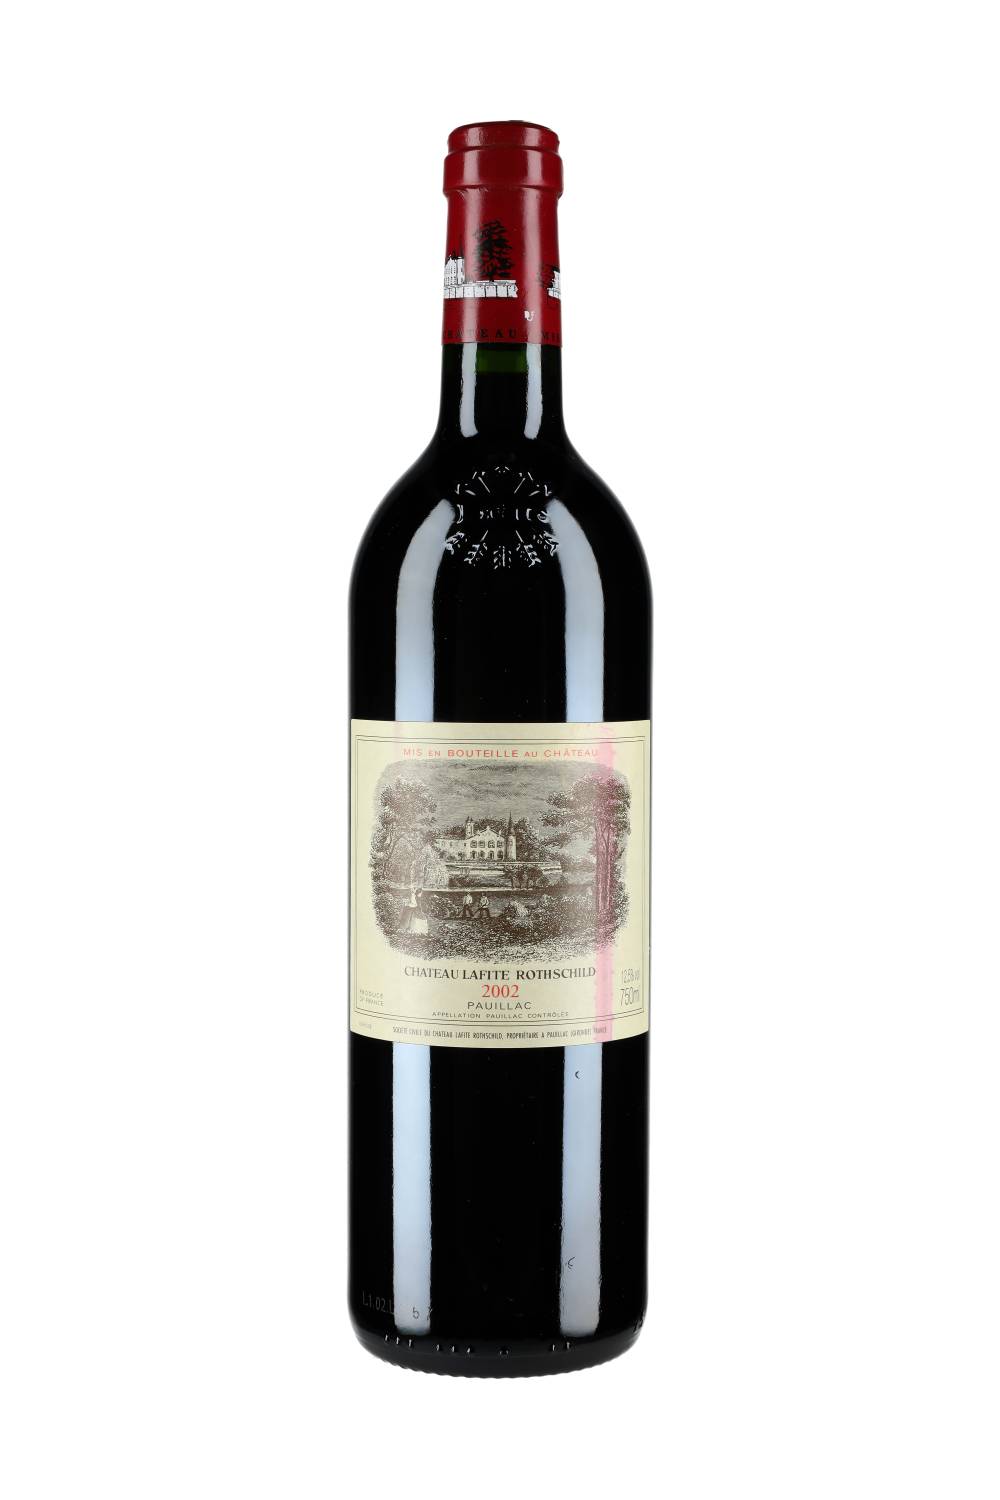 Château Lafite Rothschild Pauillac 2002 (stained label)